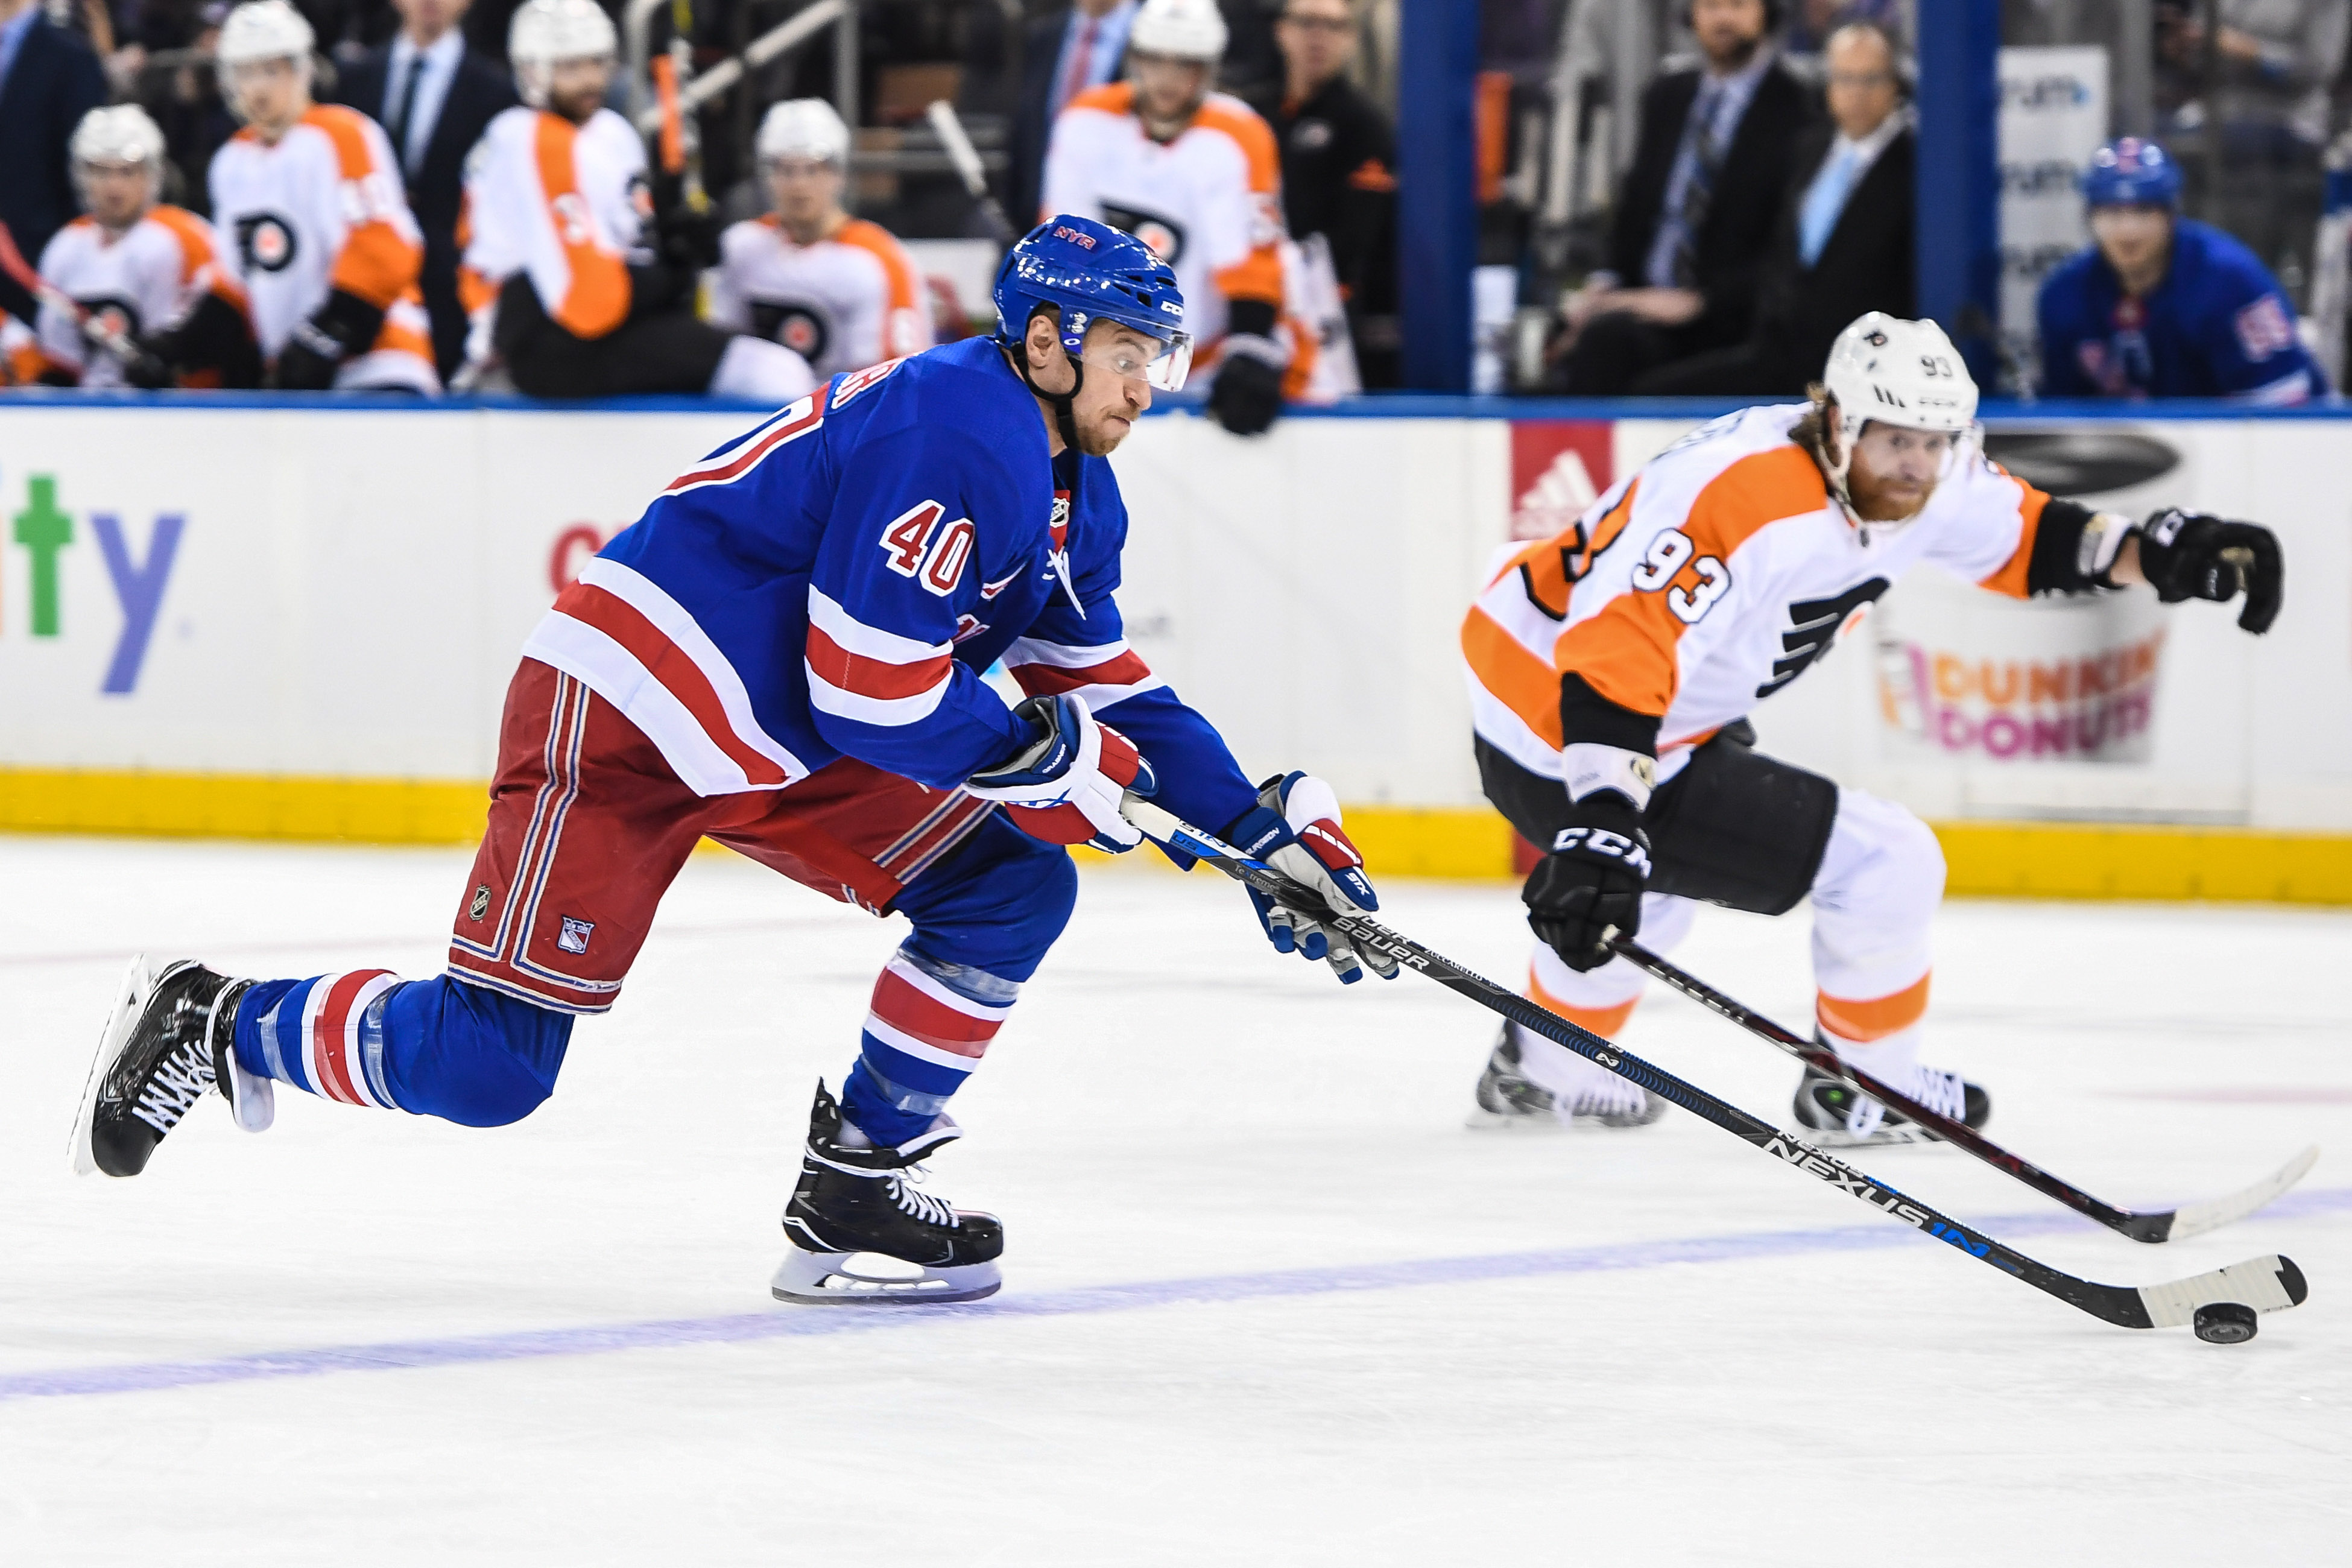 Lather, Rinse, Repeat – Same Old, Same Old After Rangers 5, Flyers 1